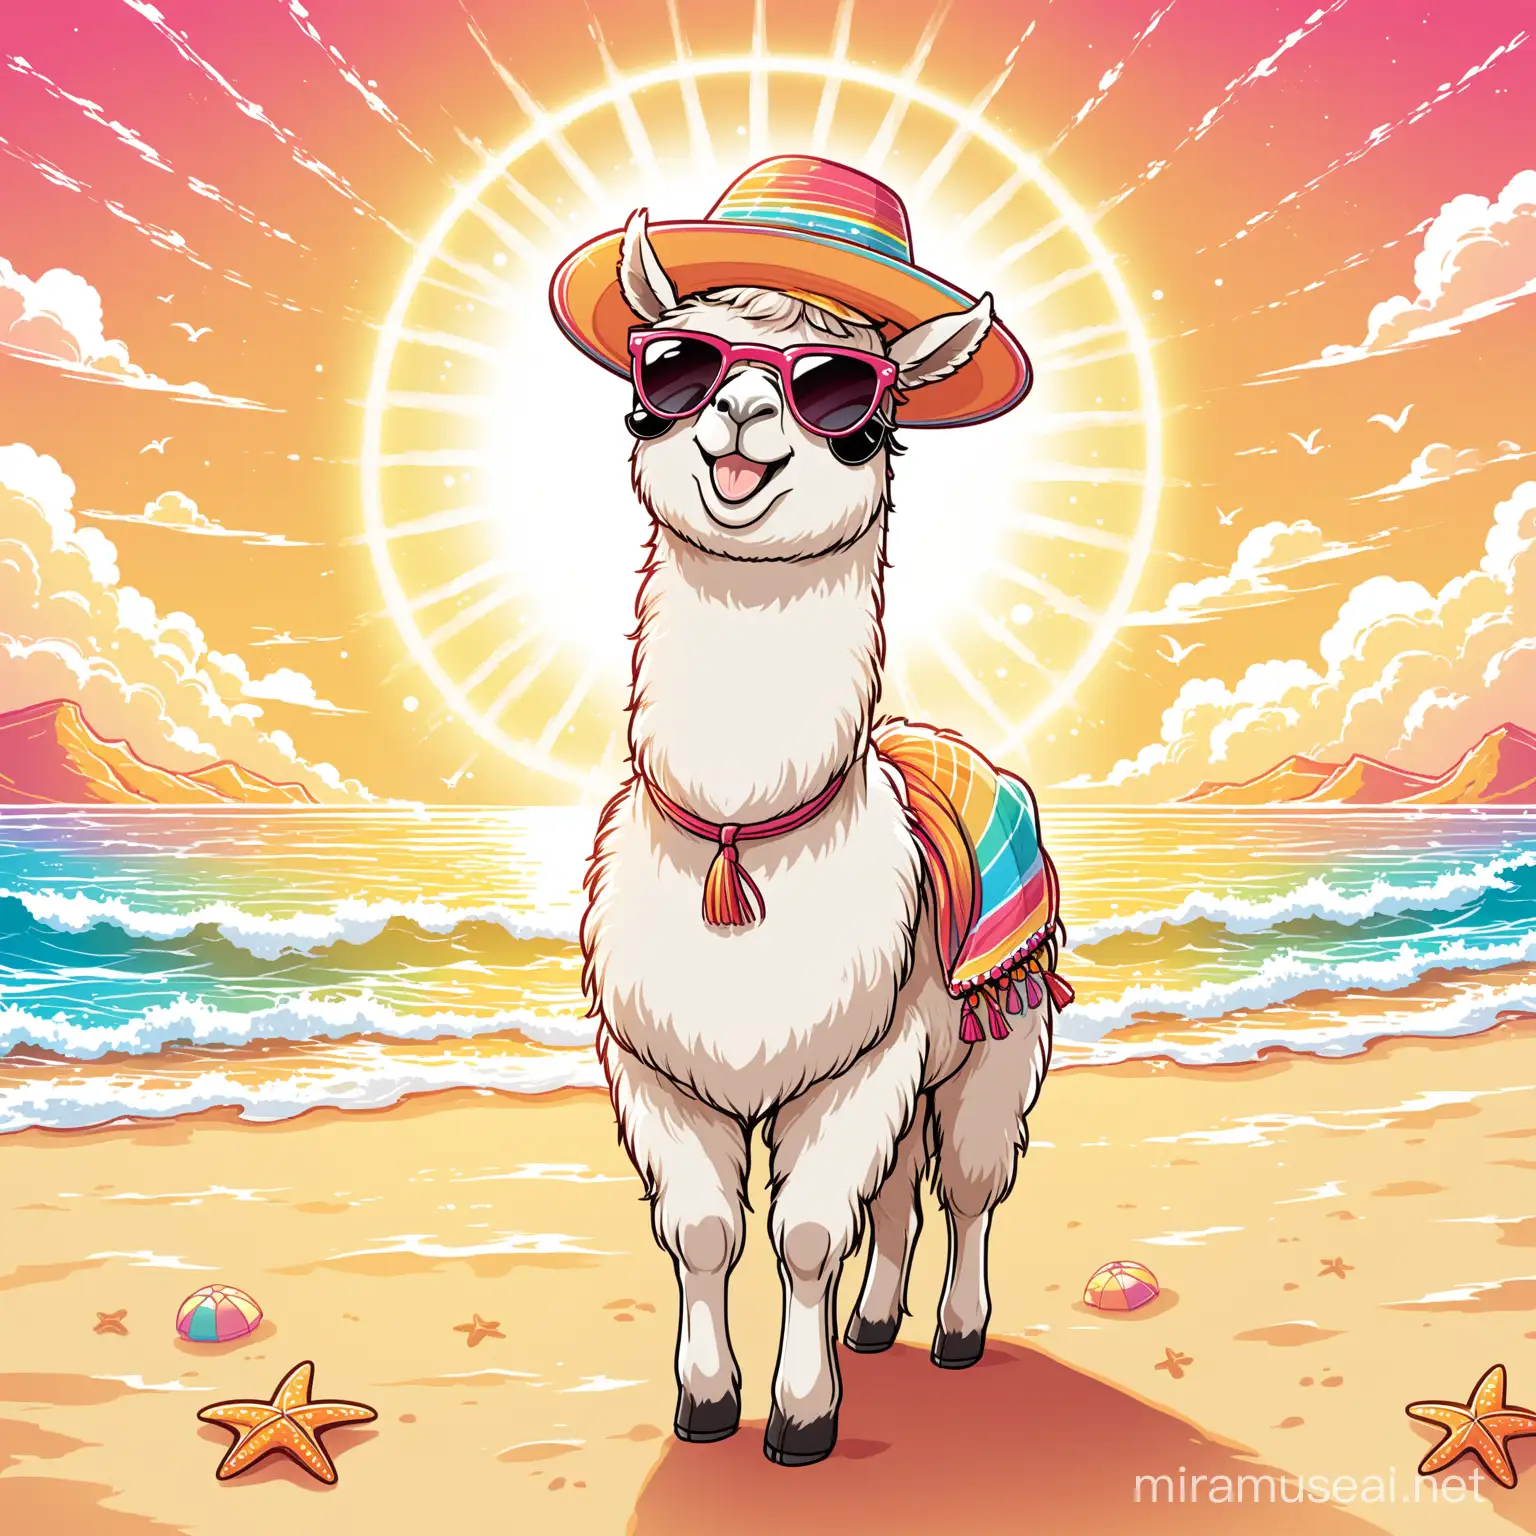 A delightful vector lineart illustration of a cute, happy llama enjoying the summer vibes. The llama is wearing a colorful summer hat and sunglasses, and is standing on a sandy beach with waves gently rolling in. There's a playful sun in the background, casting warm sunlight on the scene. The overall ambiance of the image is cheerful and fun, perfect for evoking the spirit of summer.
